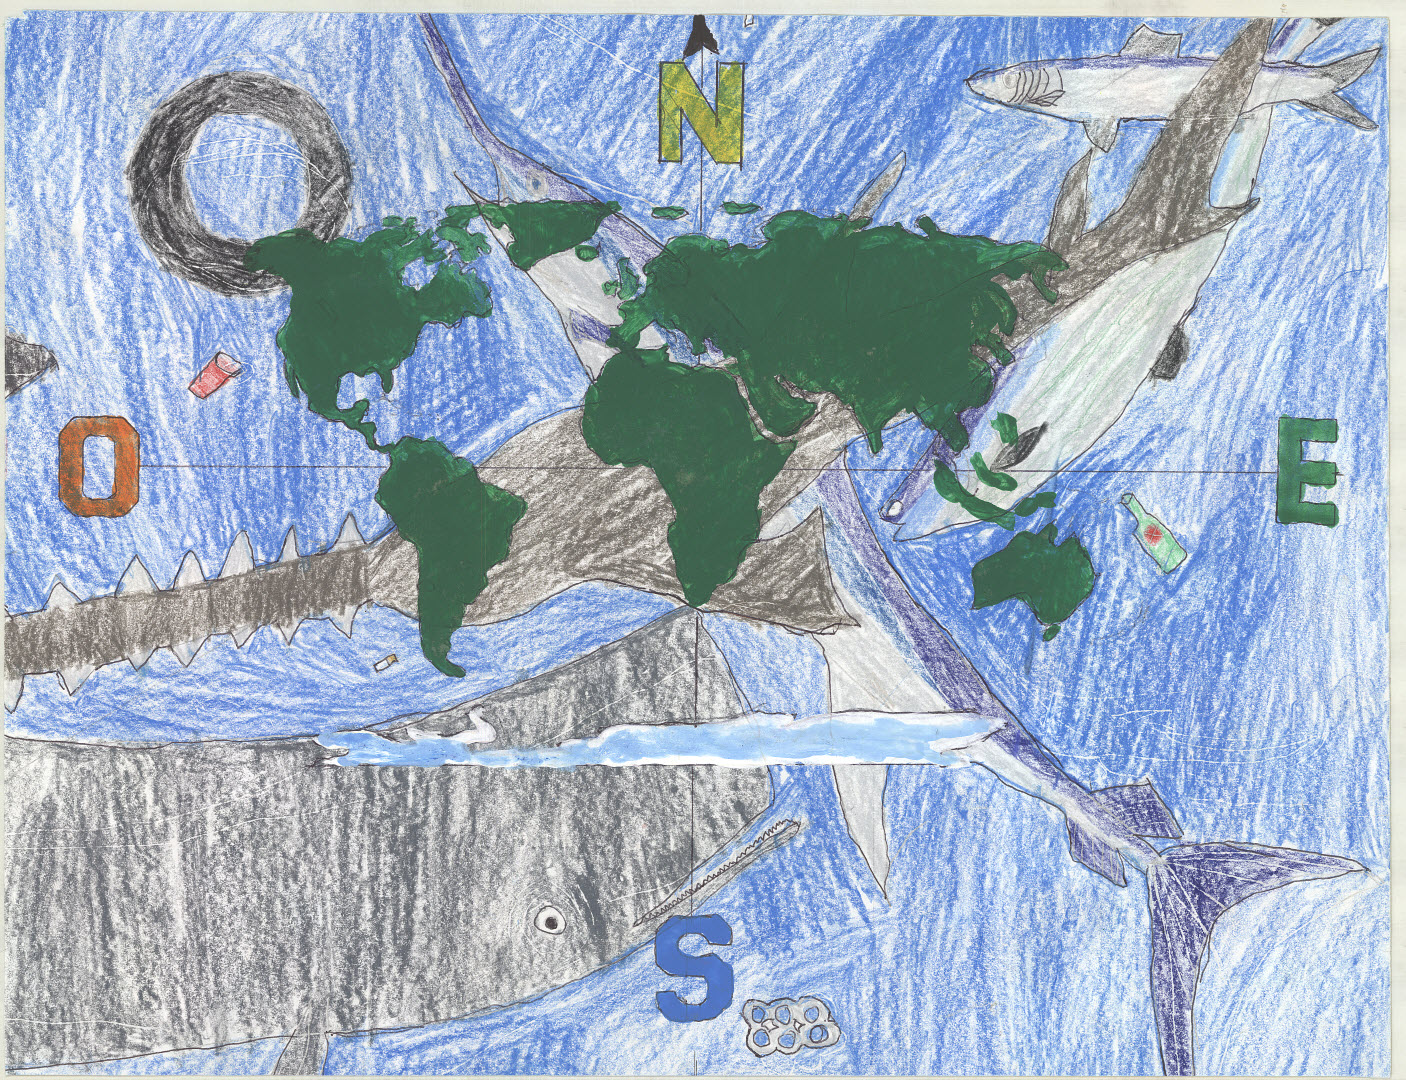 Shows the oeans and continent, fish, shark, pollution 